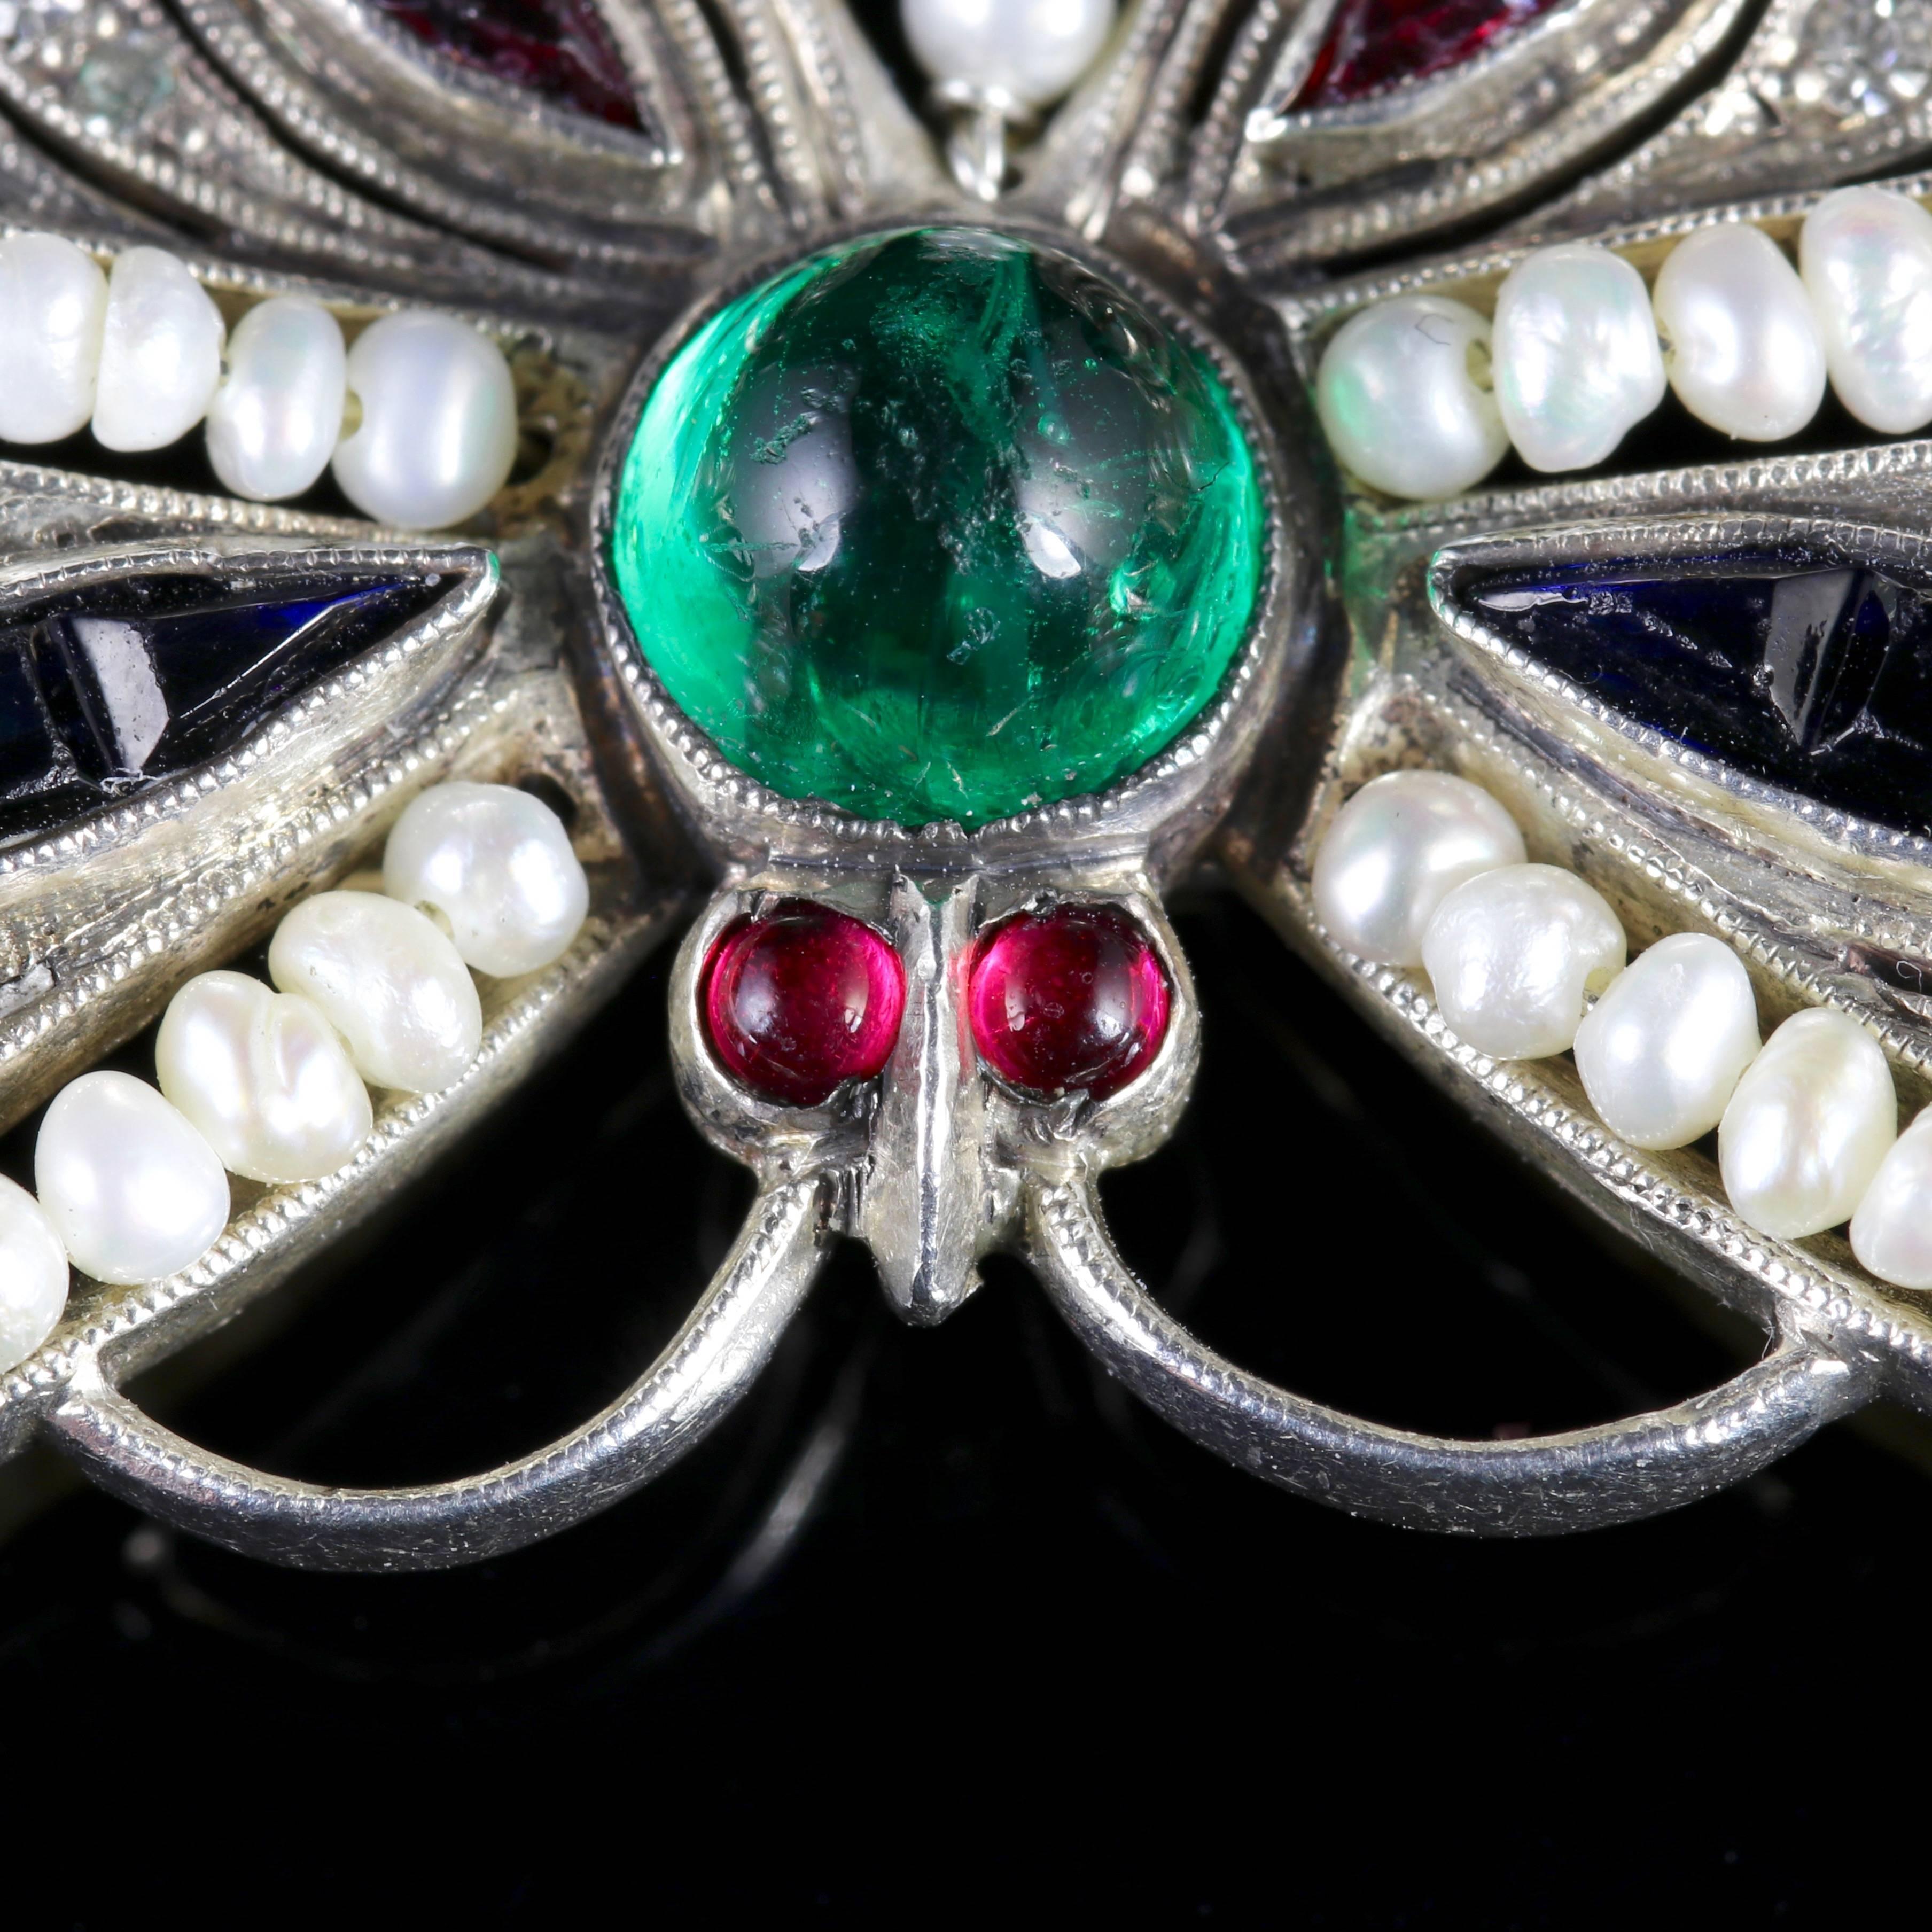 This beautiful Butterfly Brooch boasts beautiful coloured Paste Stones and Pearls, all set in Sterling Silver.

A stunning Victorian piece, Circa 1900.

Sparkling old cut Paste Stones adorn the Butterflies eyes, wings and body with a deep emerald